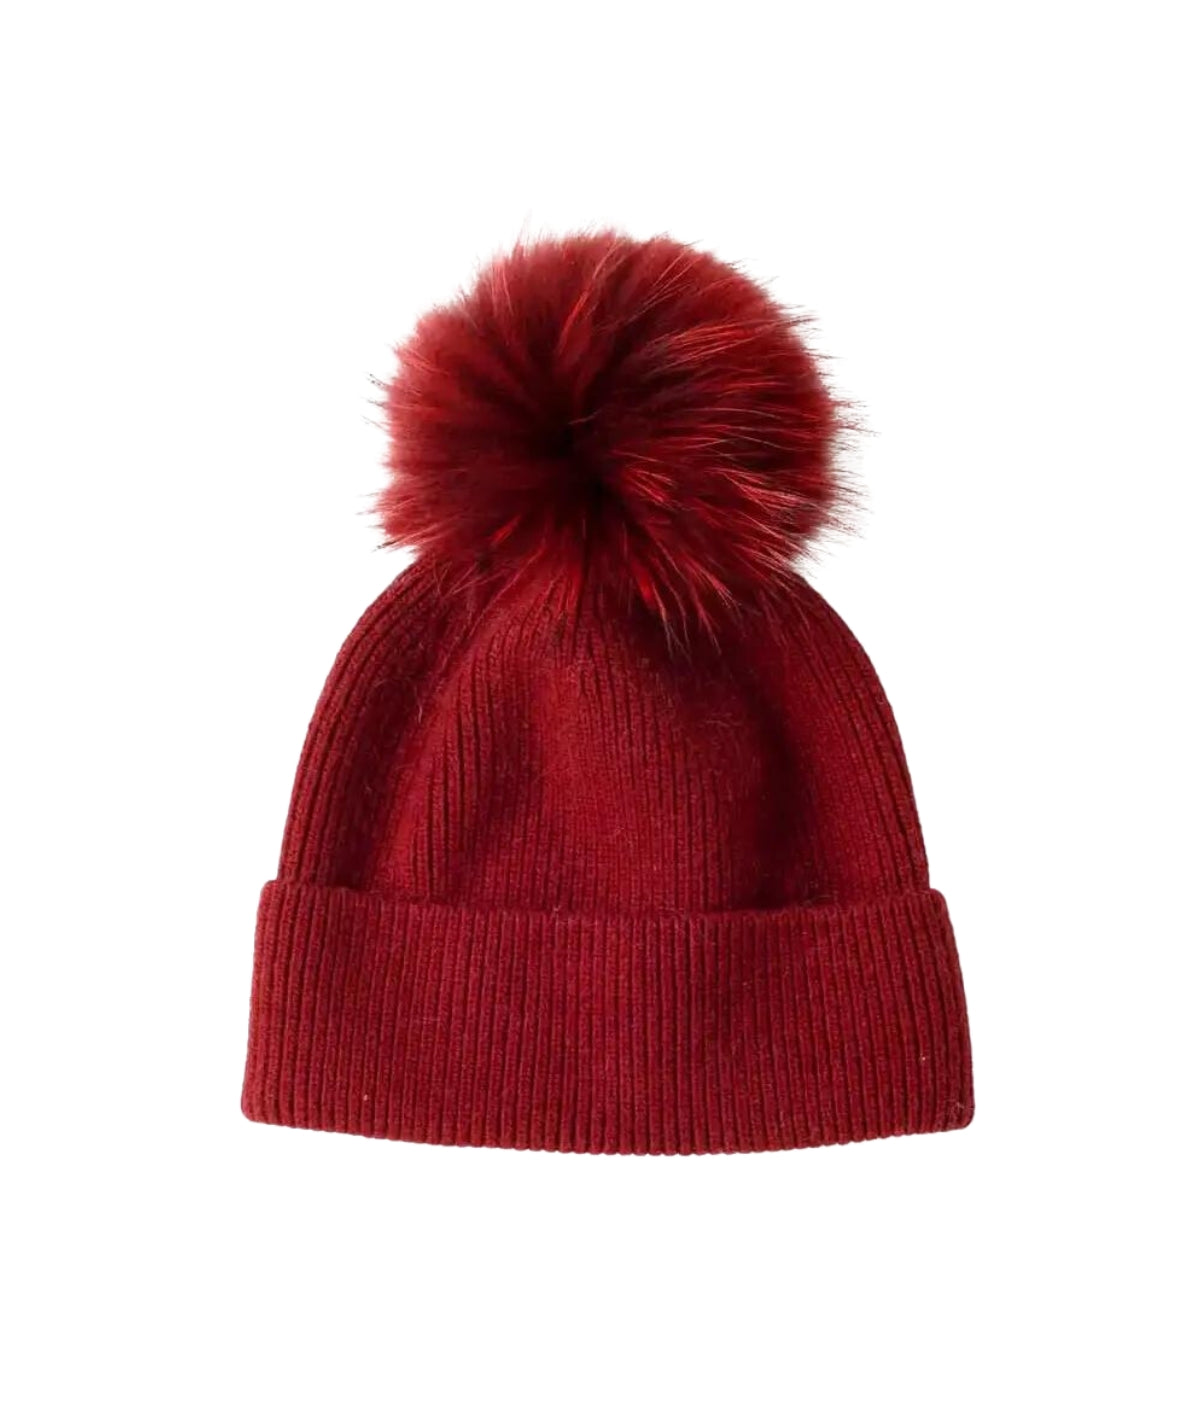 Ribbed Knit Beanie- Red Faux Fur